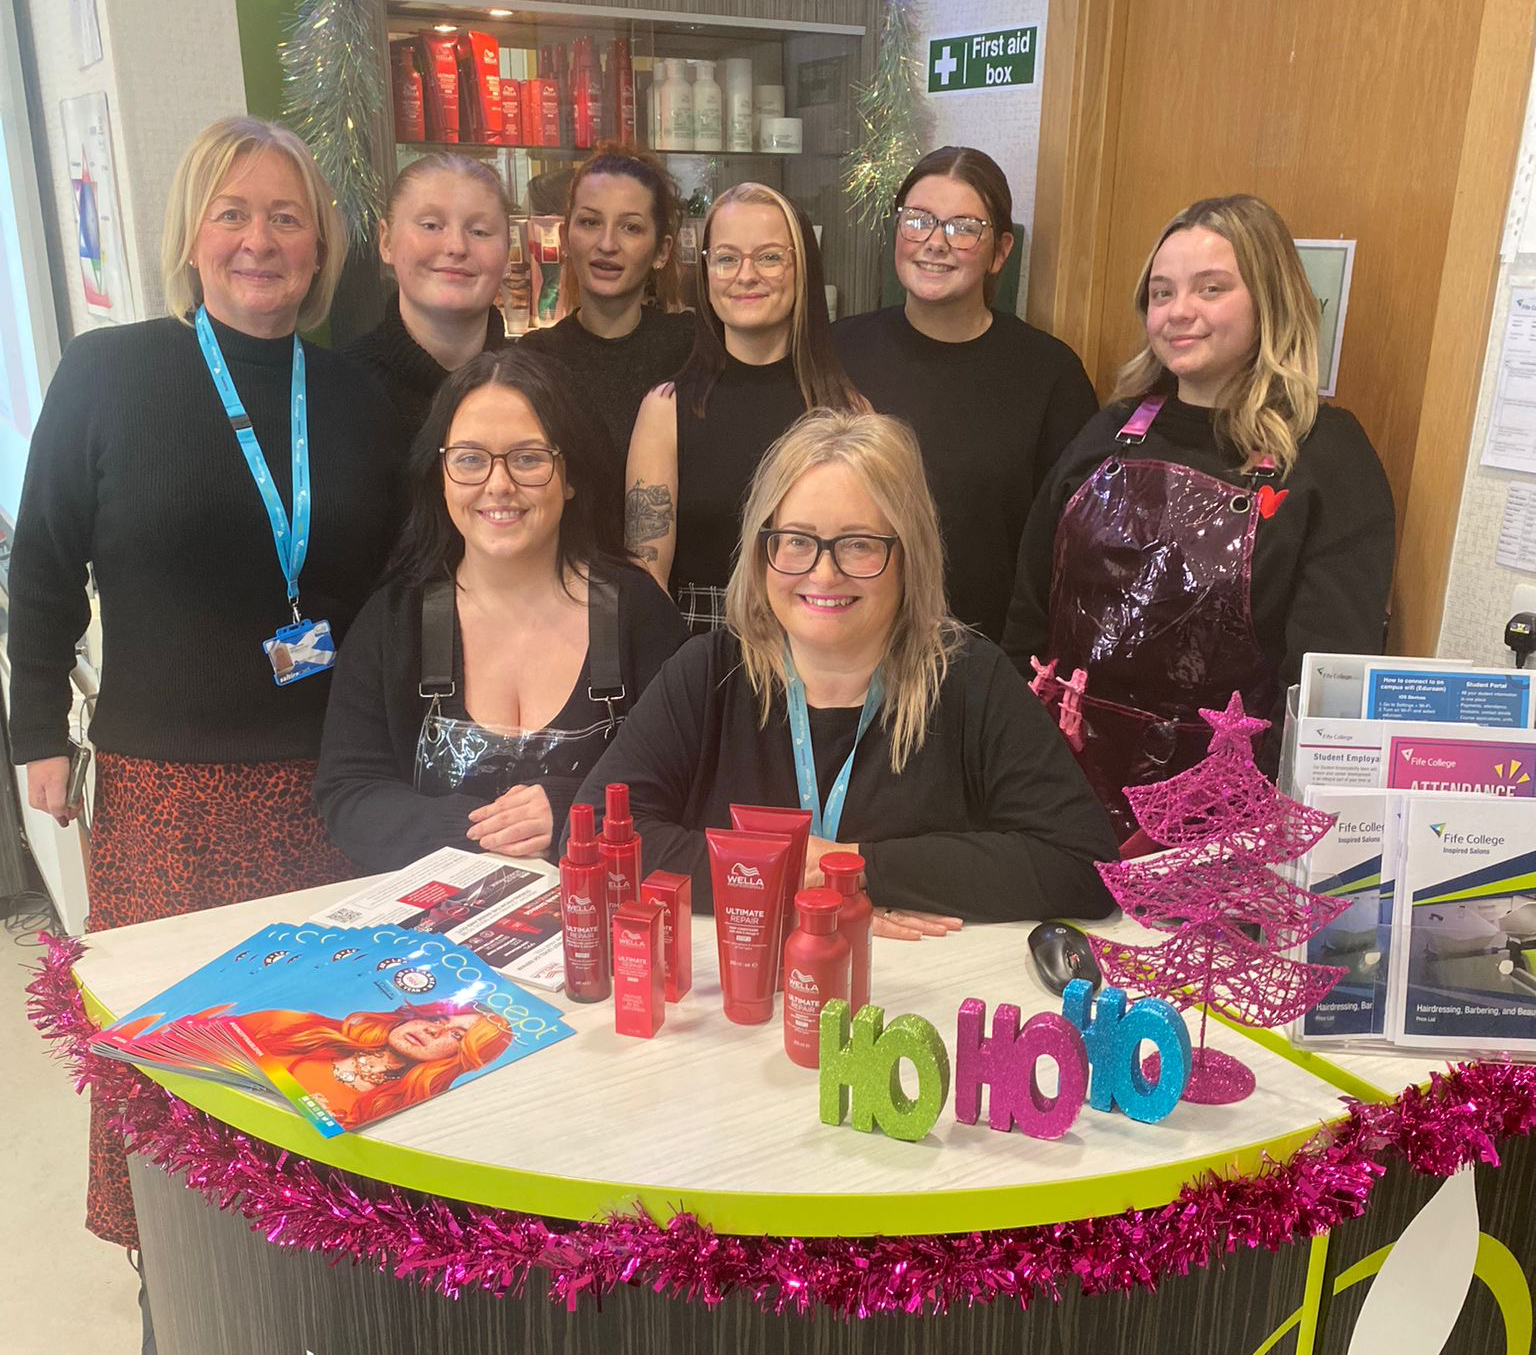 Fife College's Winter Wonderland – night of pampering and connection at Dunfermline Campus